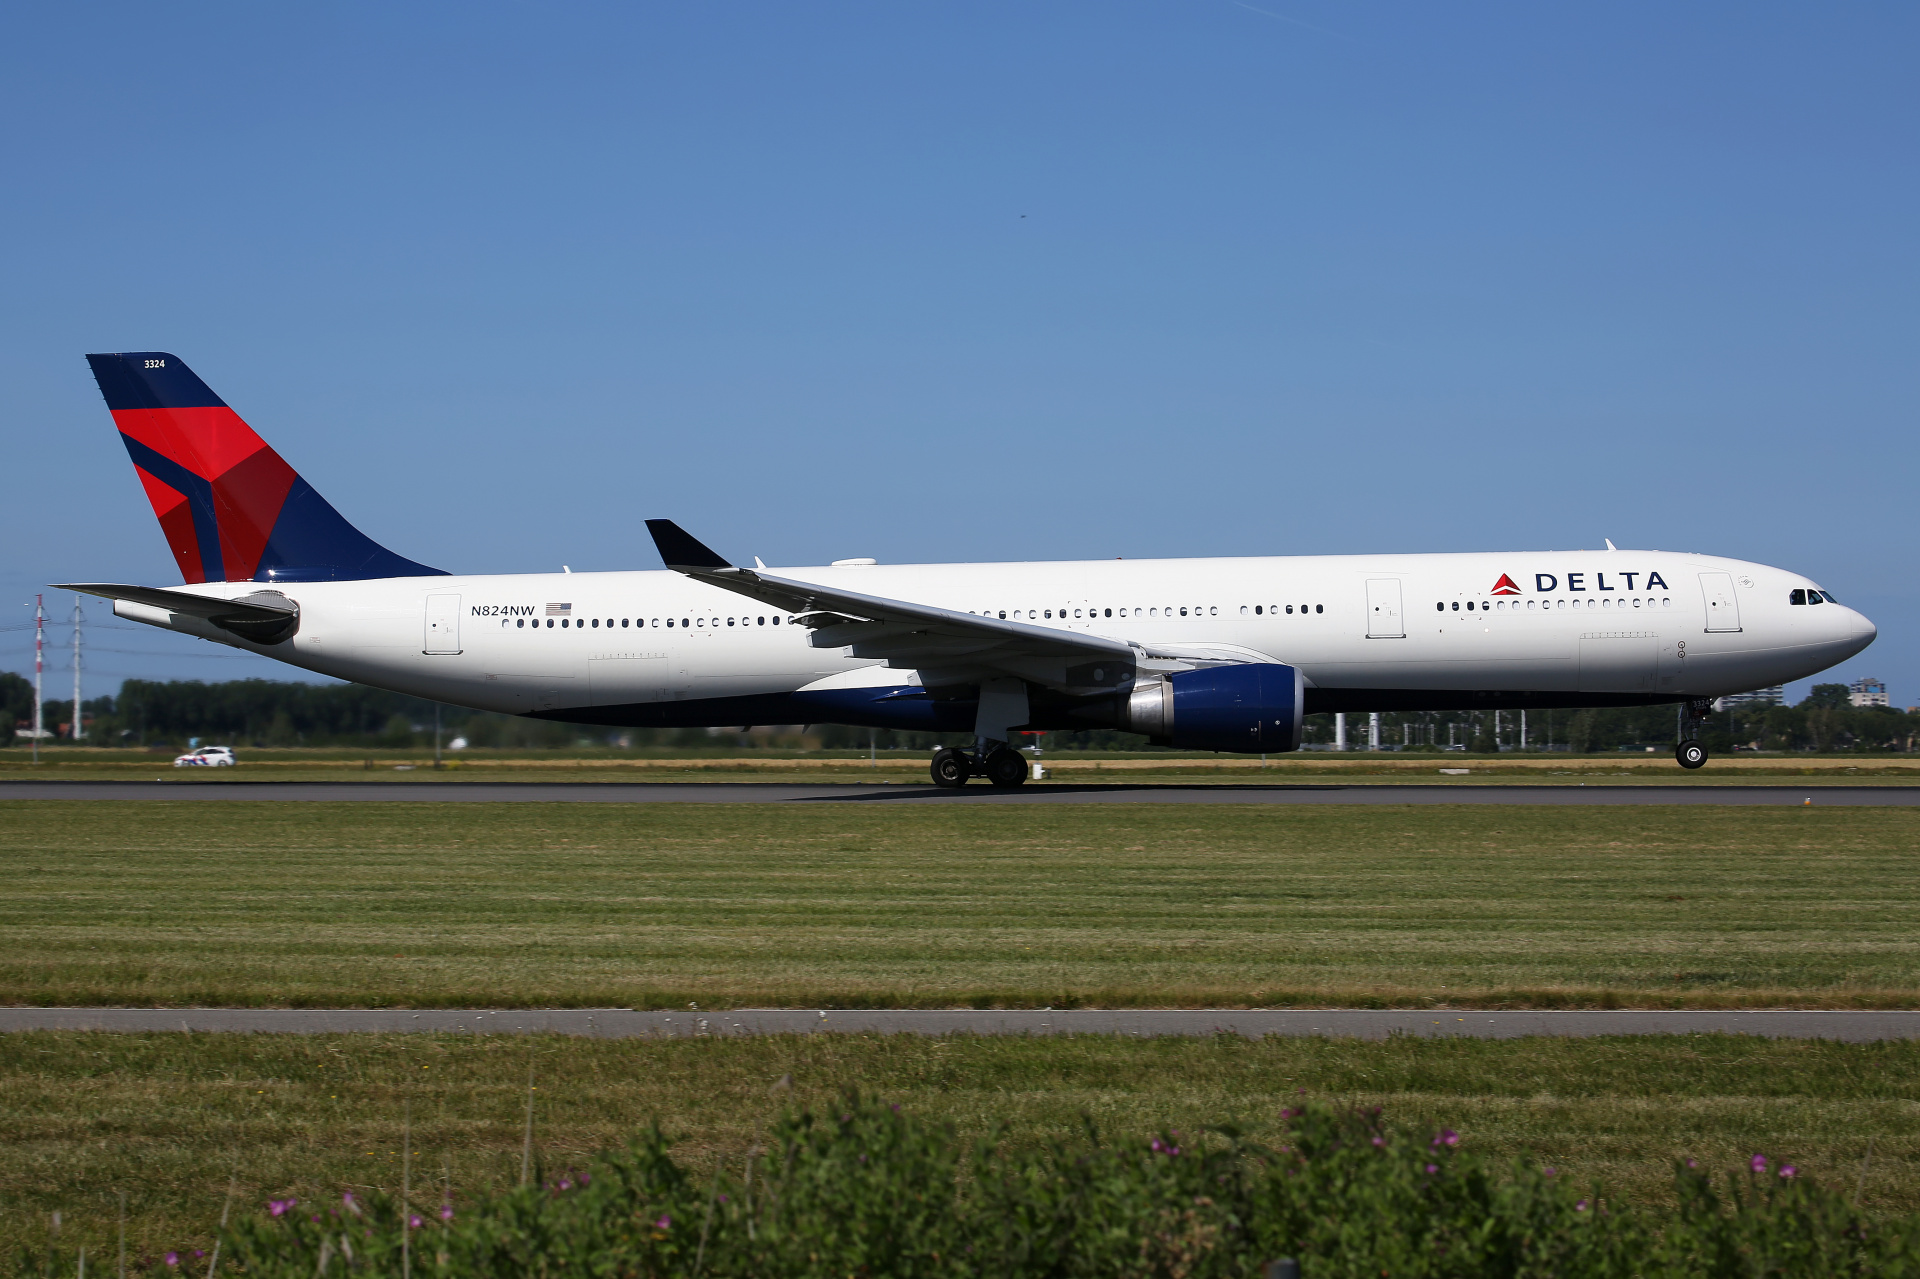 N824NW (Samoloty » Spotting na Schiphol » Airbus A330-300 » Delta Airlines)